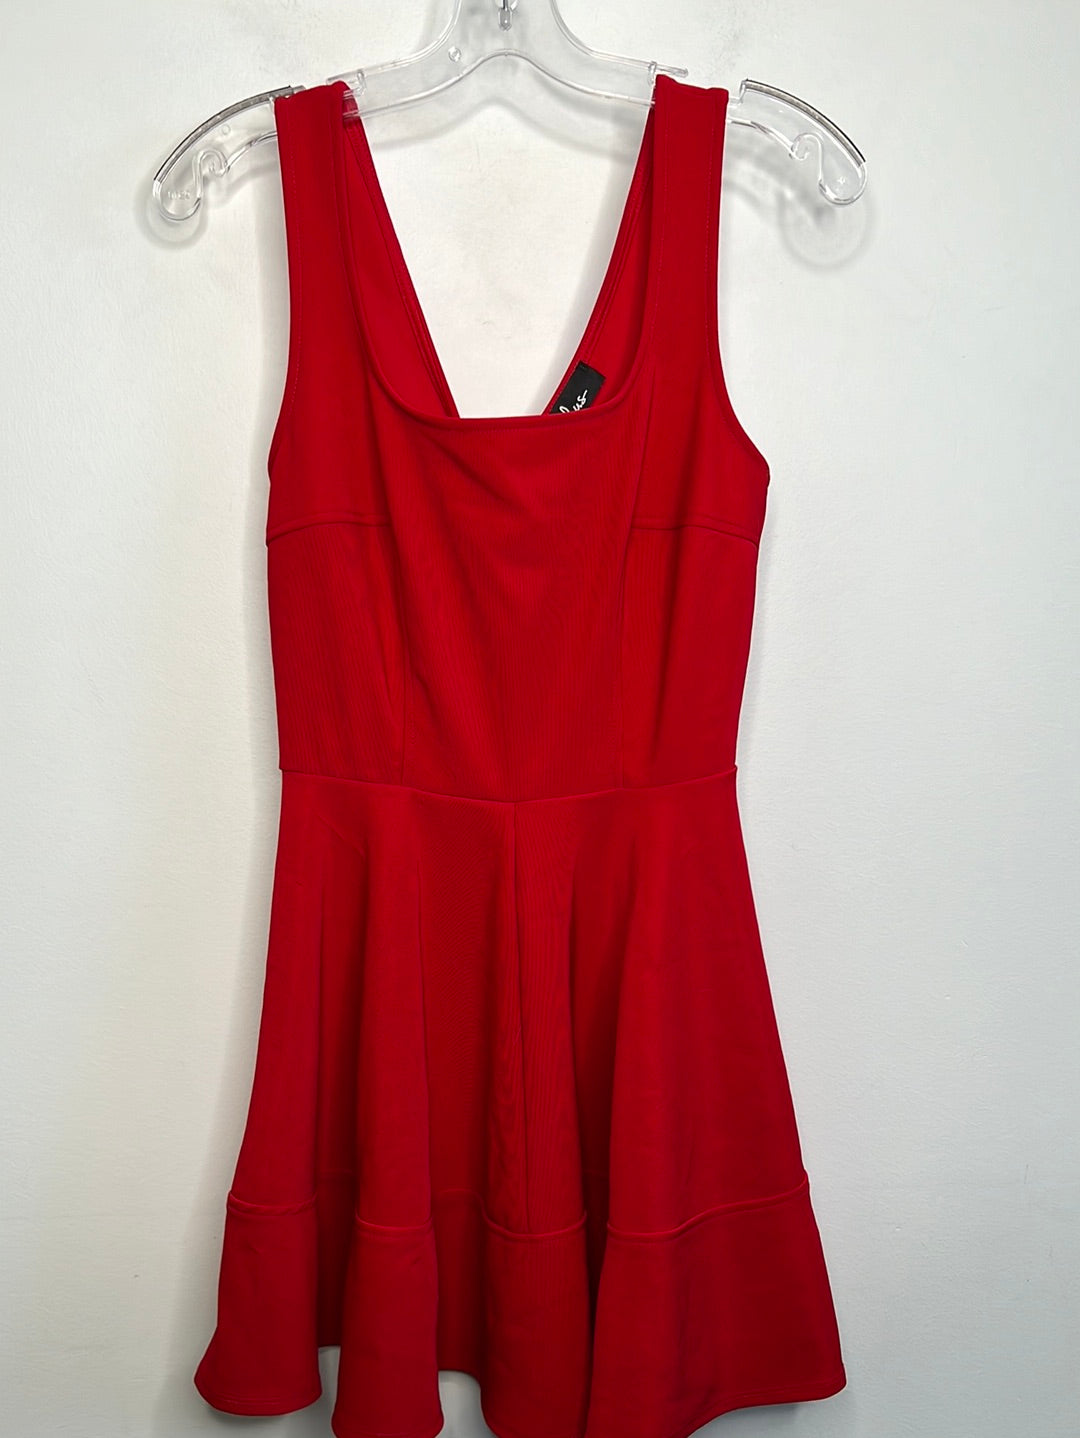 Lulu's Red Lined Stretch Skater Dress (M)